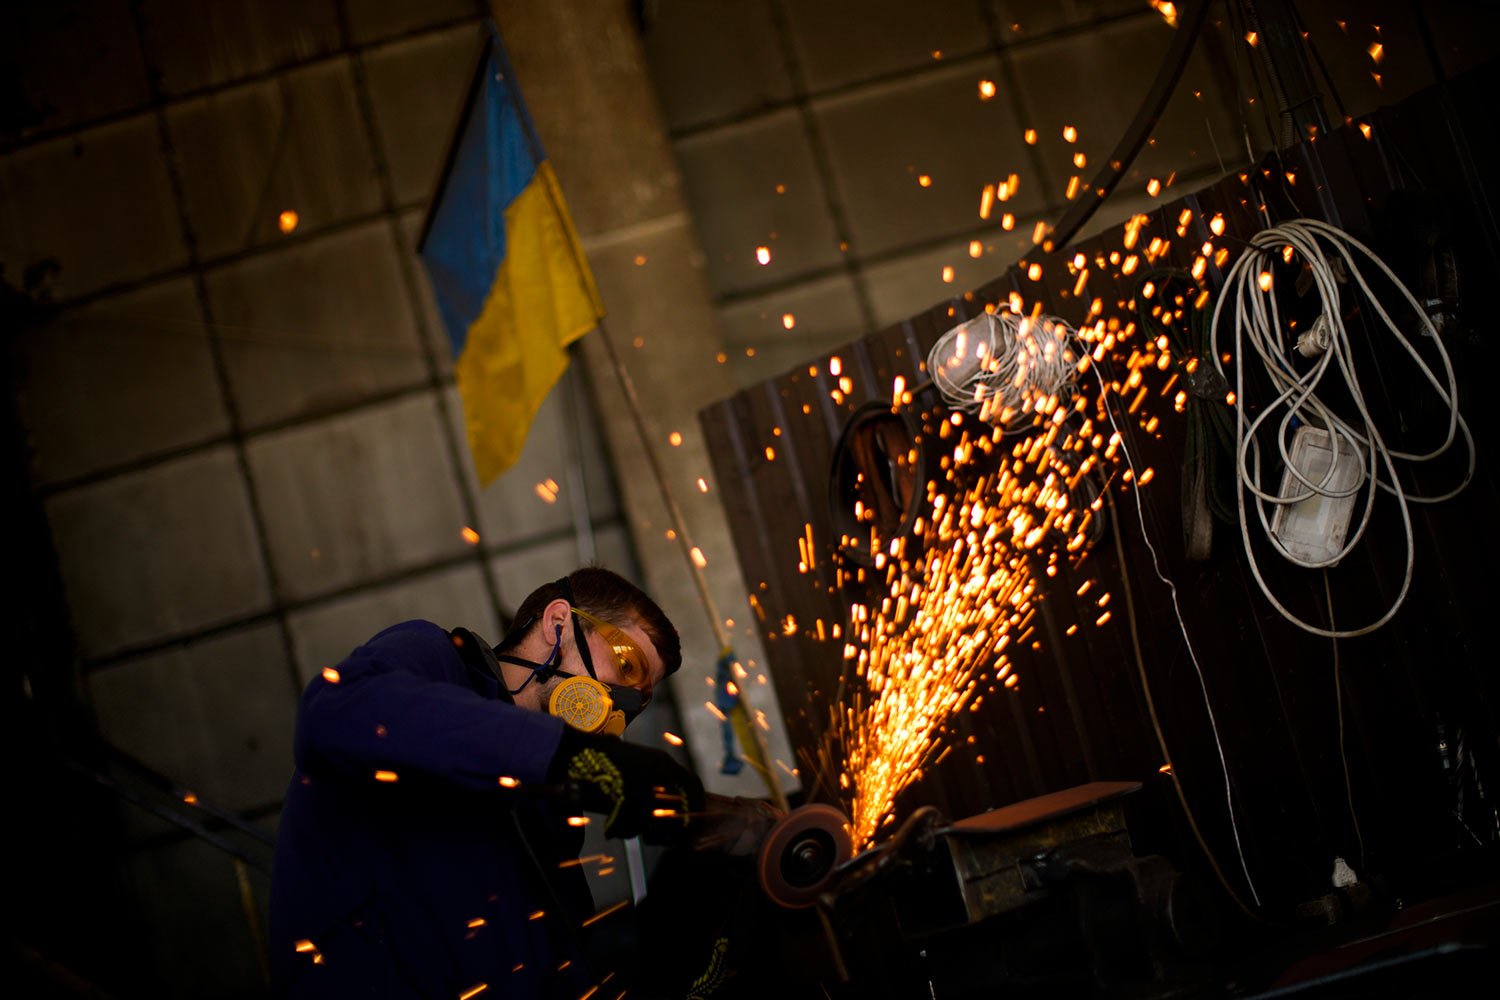  A volunteer shapes metal plates with an angle grinder at a facility producing material for Ukrainian soldiers in Zaporizhzhia, Ukraine, Saturday, May 7, 2022. An old industrial complex in the southeastern Ukrainian riverside city of Zaporizhzhia has